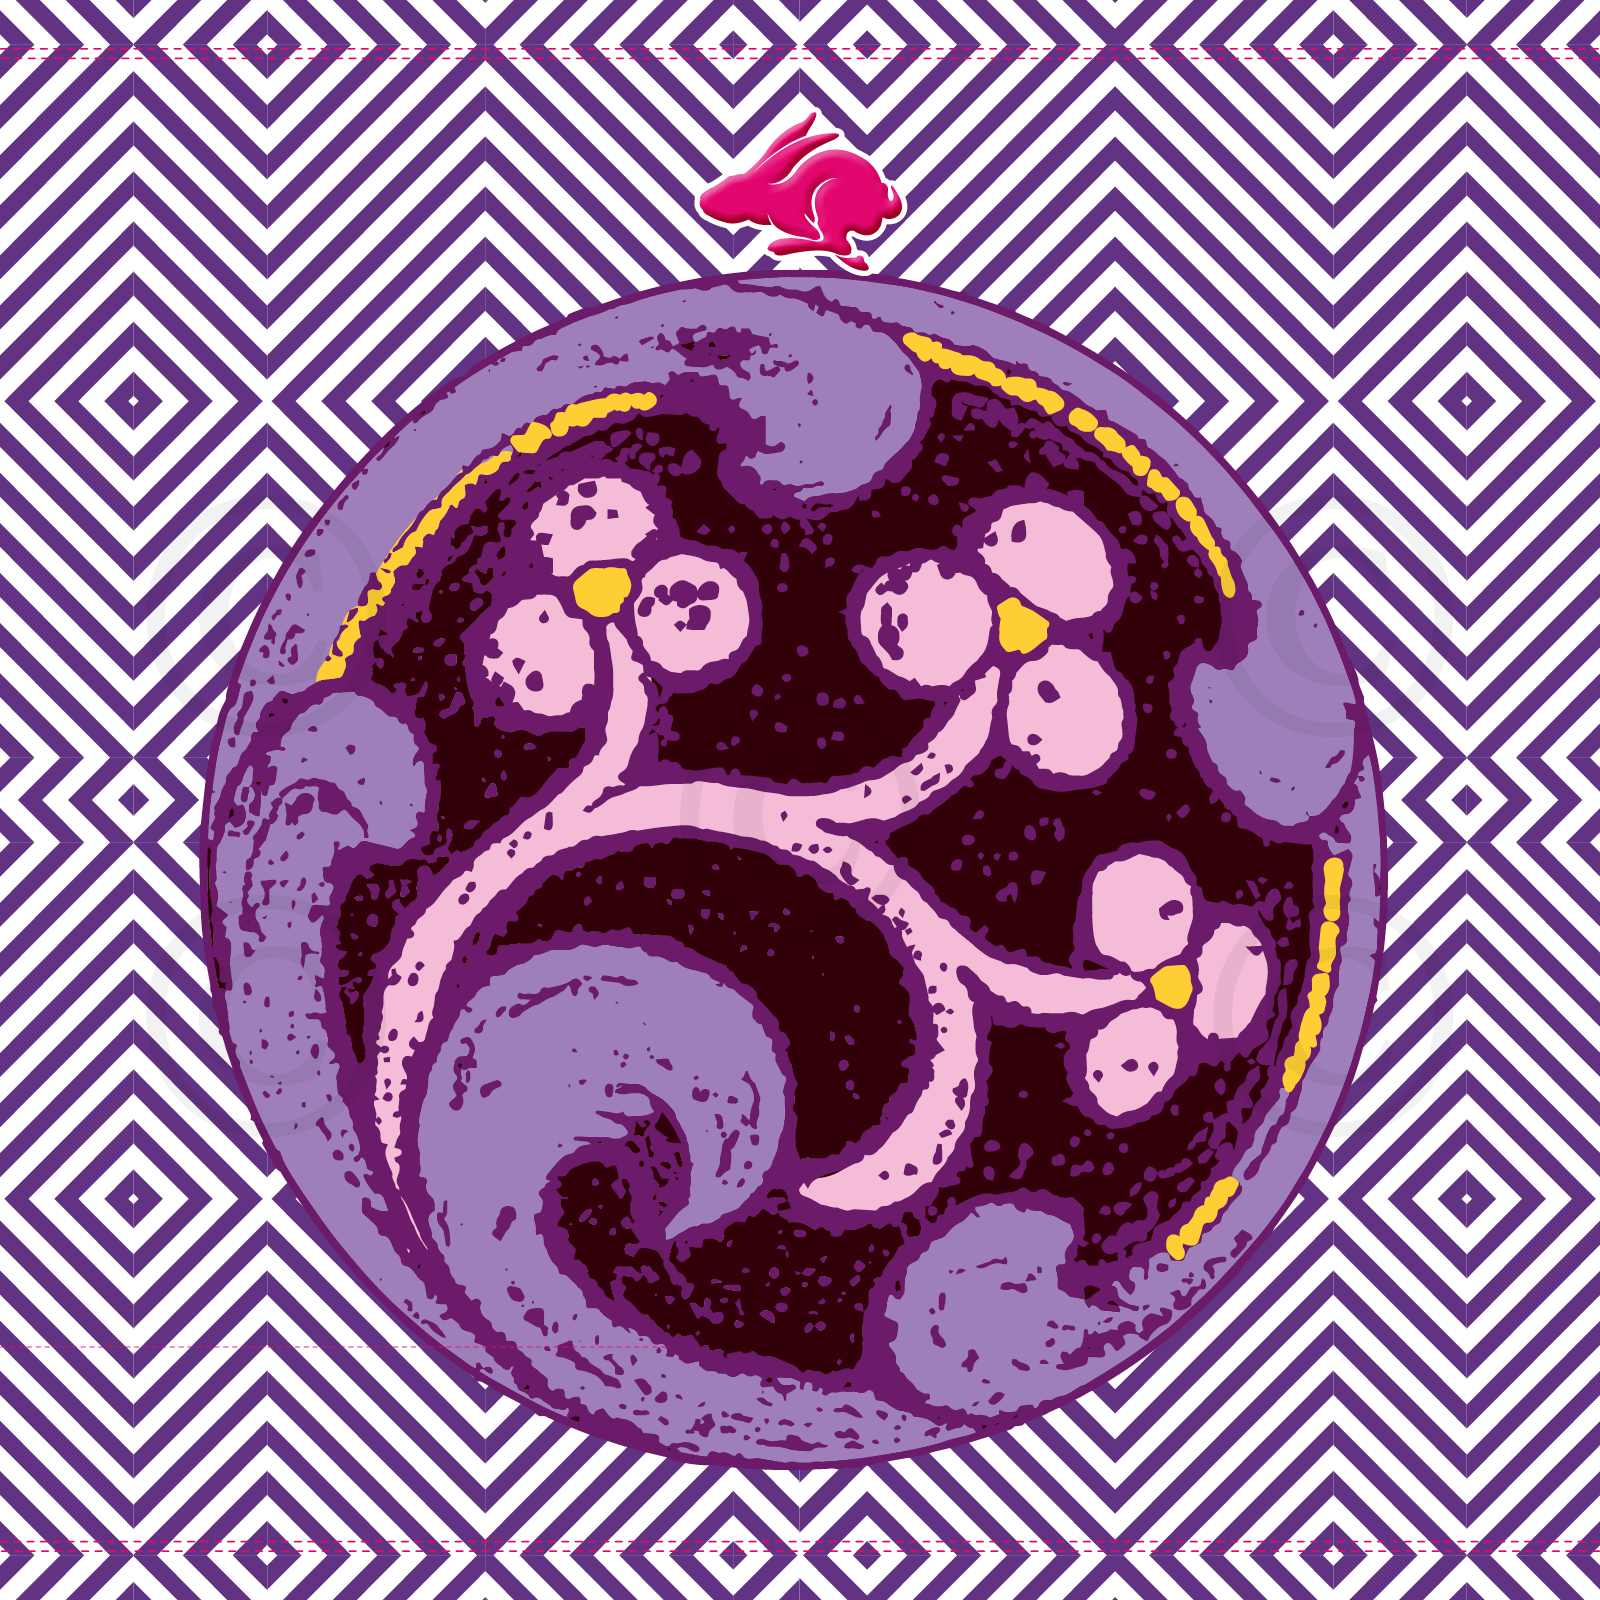 Passion Fruit Button on purple stripe background with bunny